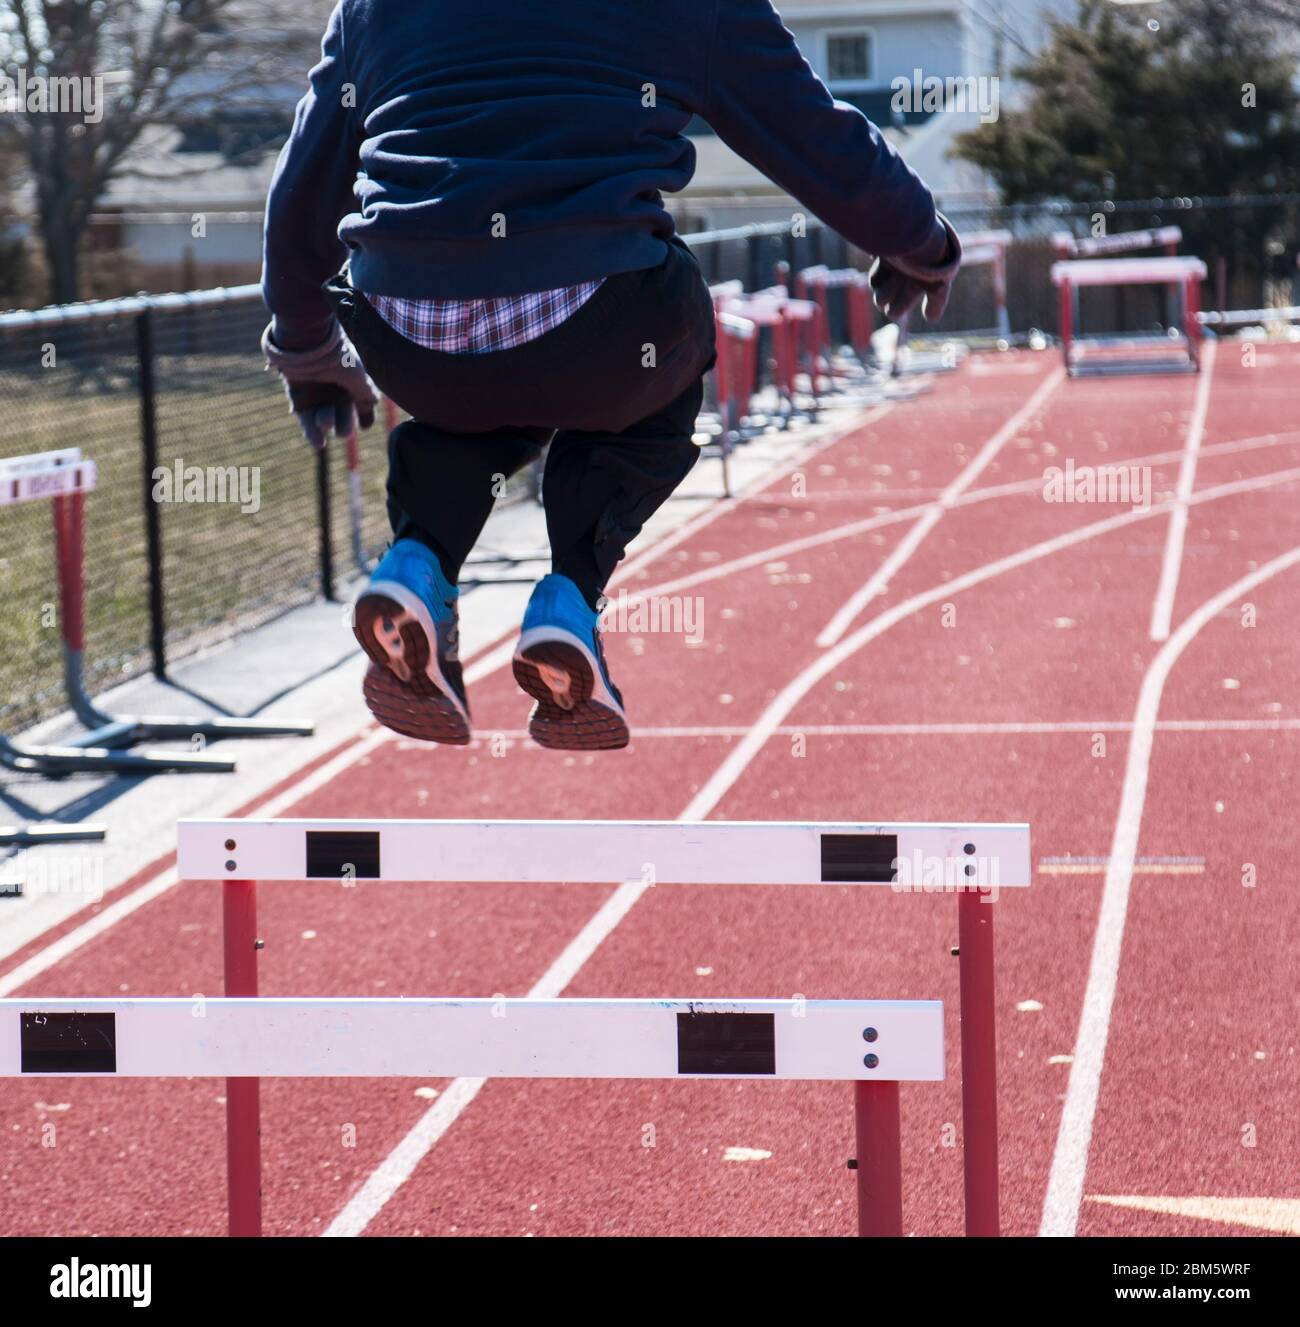 A track and field runner is jumping over hurdles on a red track during winter with gloves on. Stock Photo